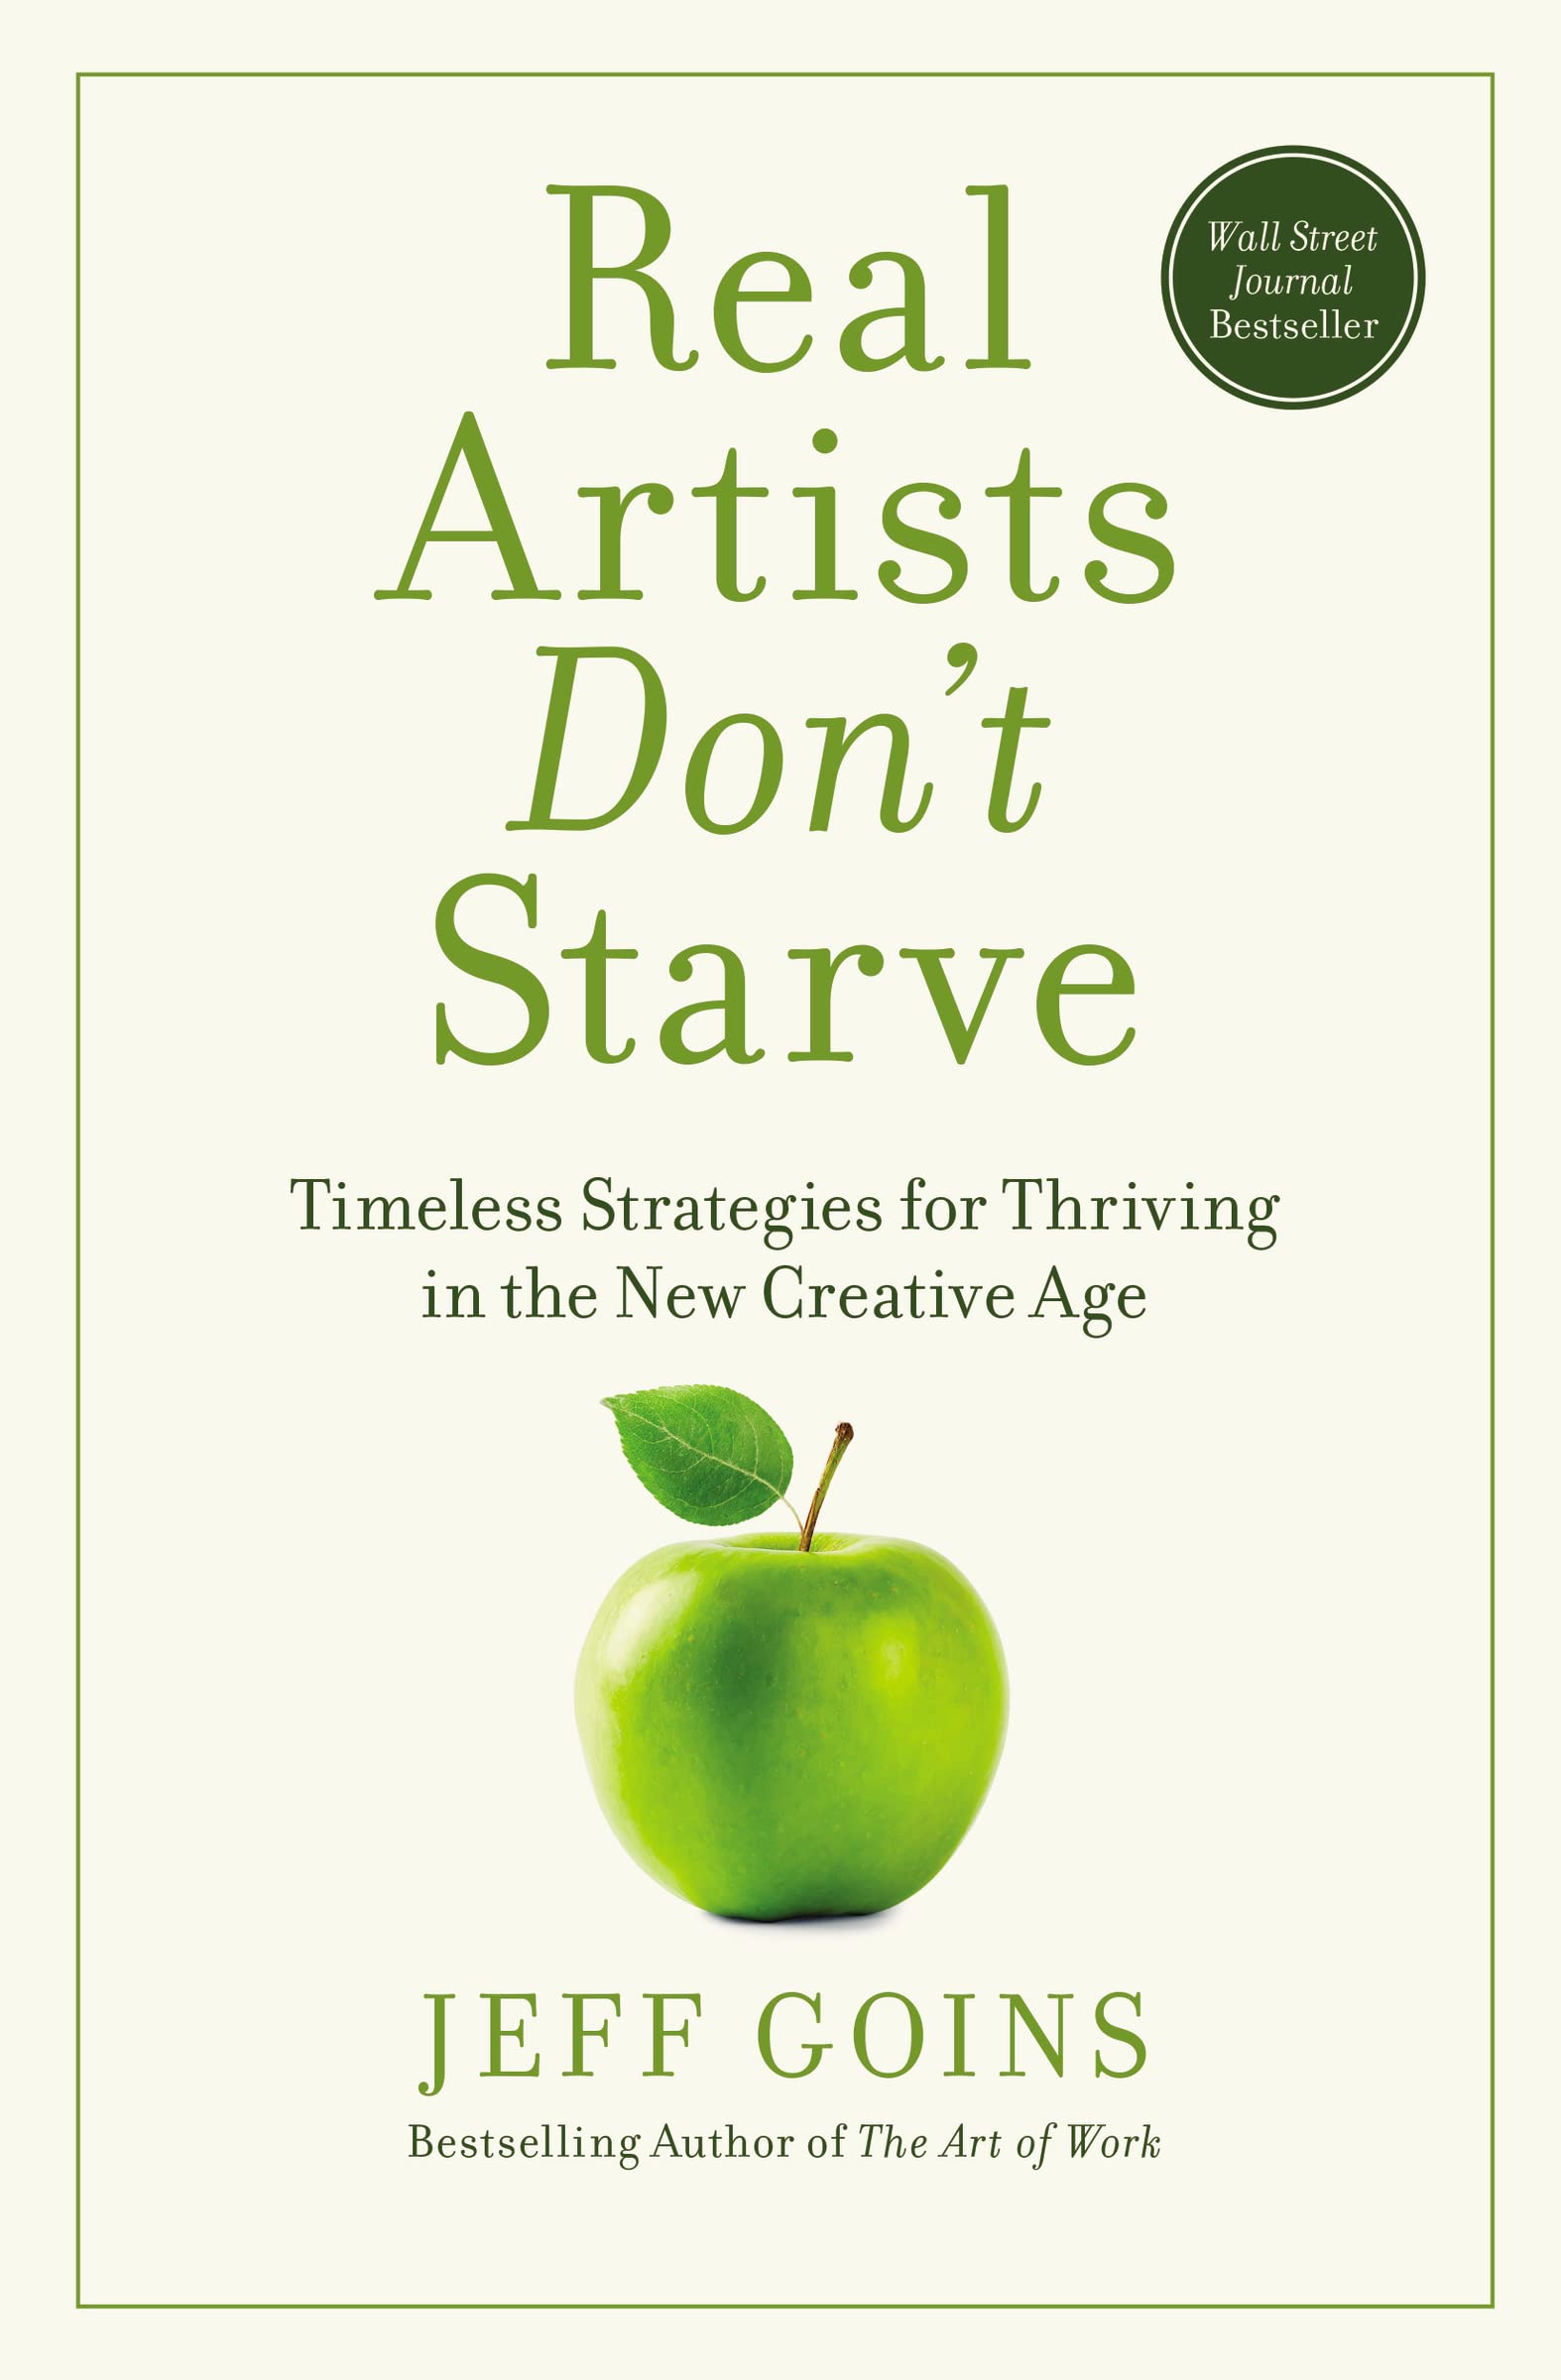 real artists don't starve by Jeff goins book for artists 